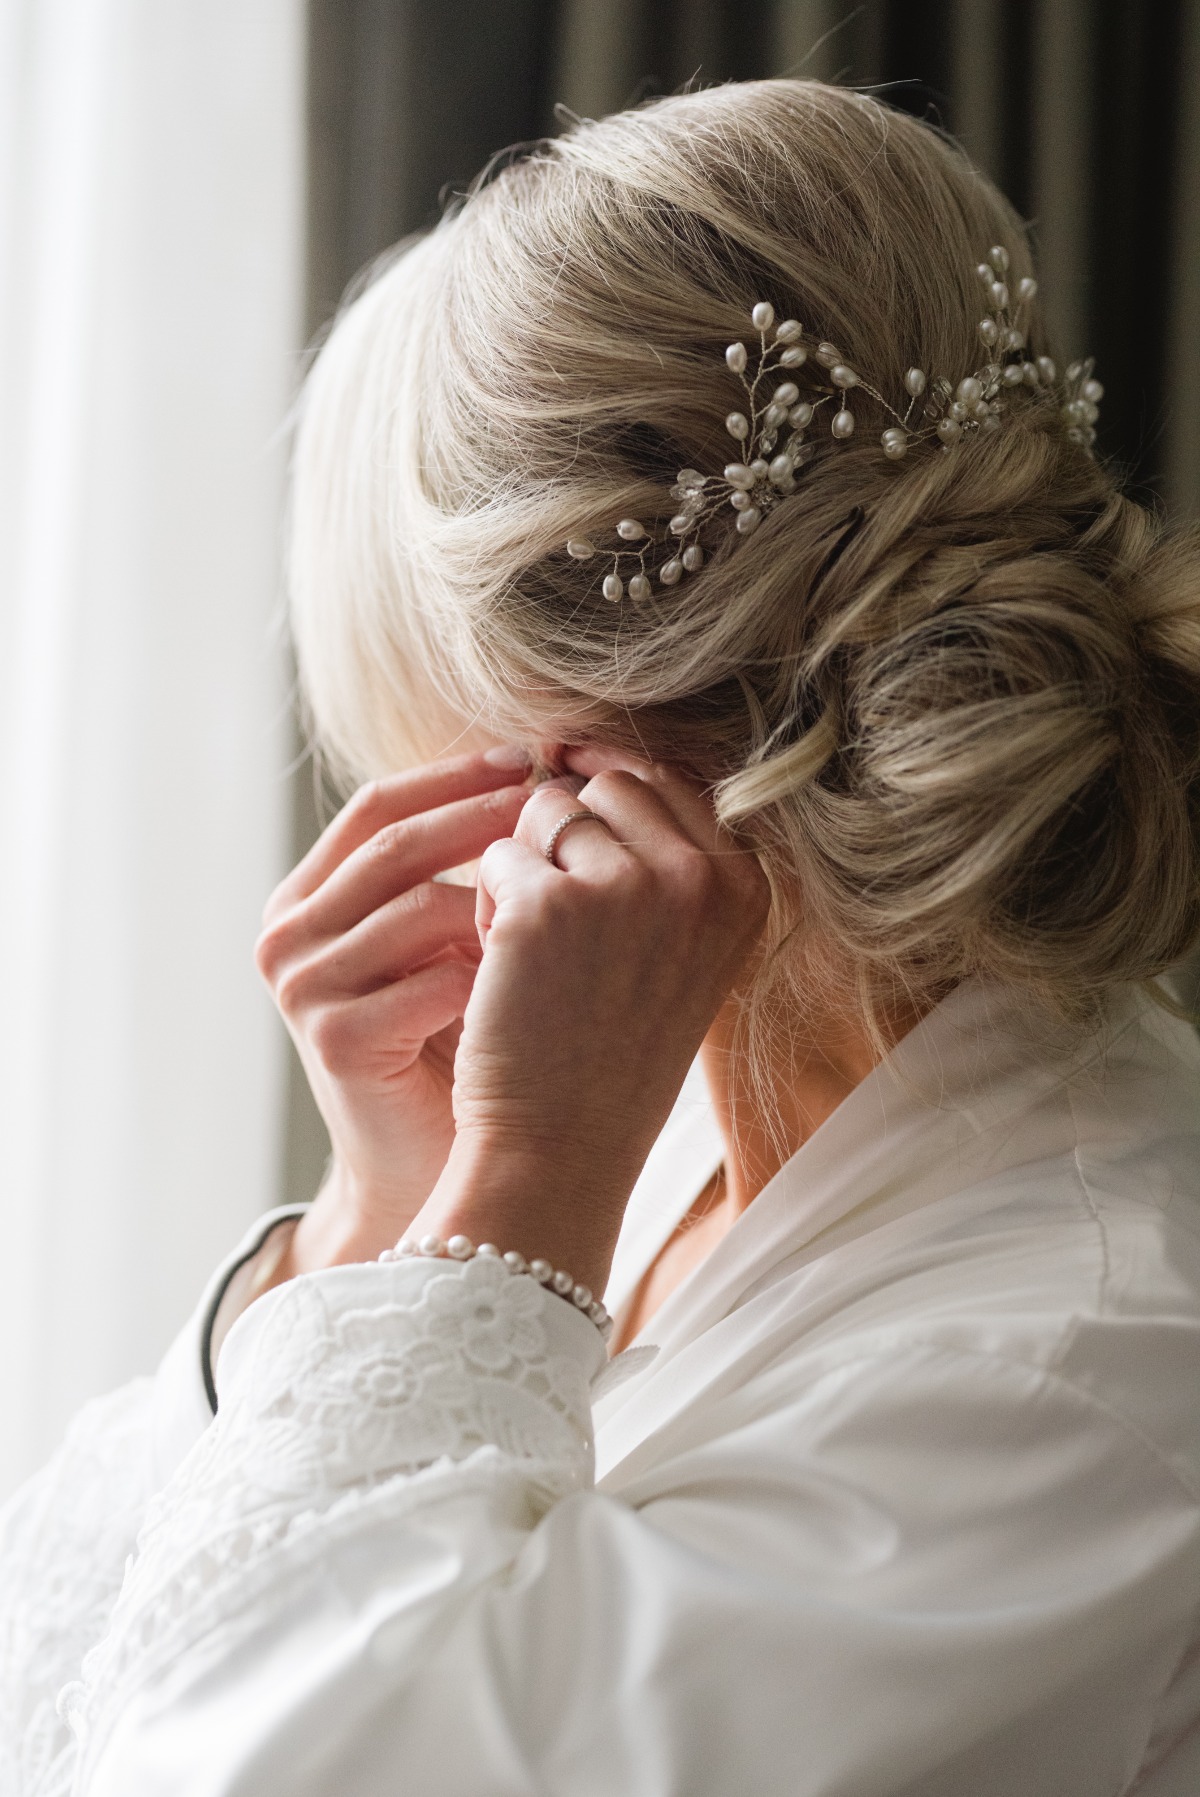 Portrait of bride's wedding hair with pearl hairpiece